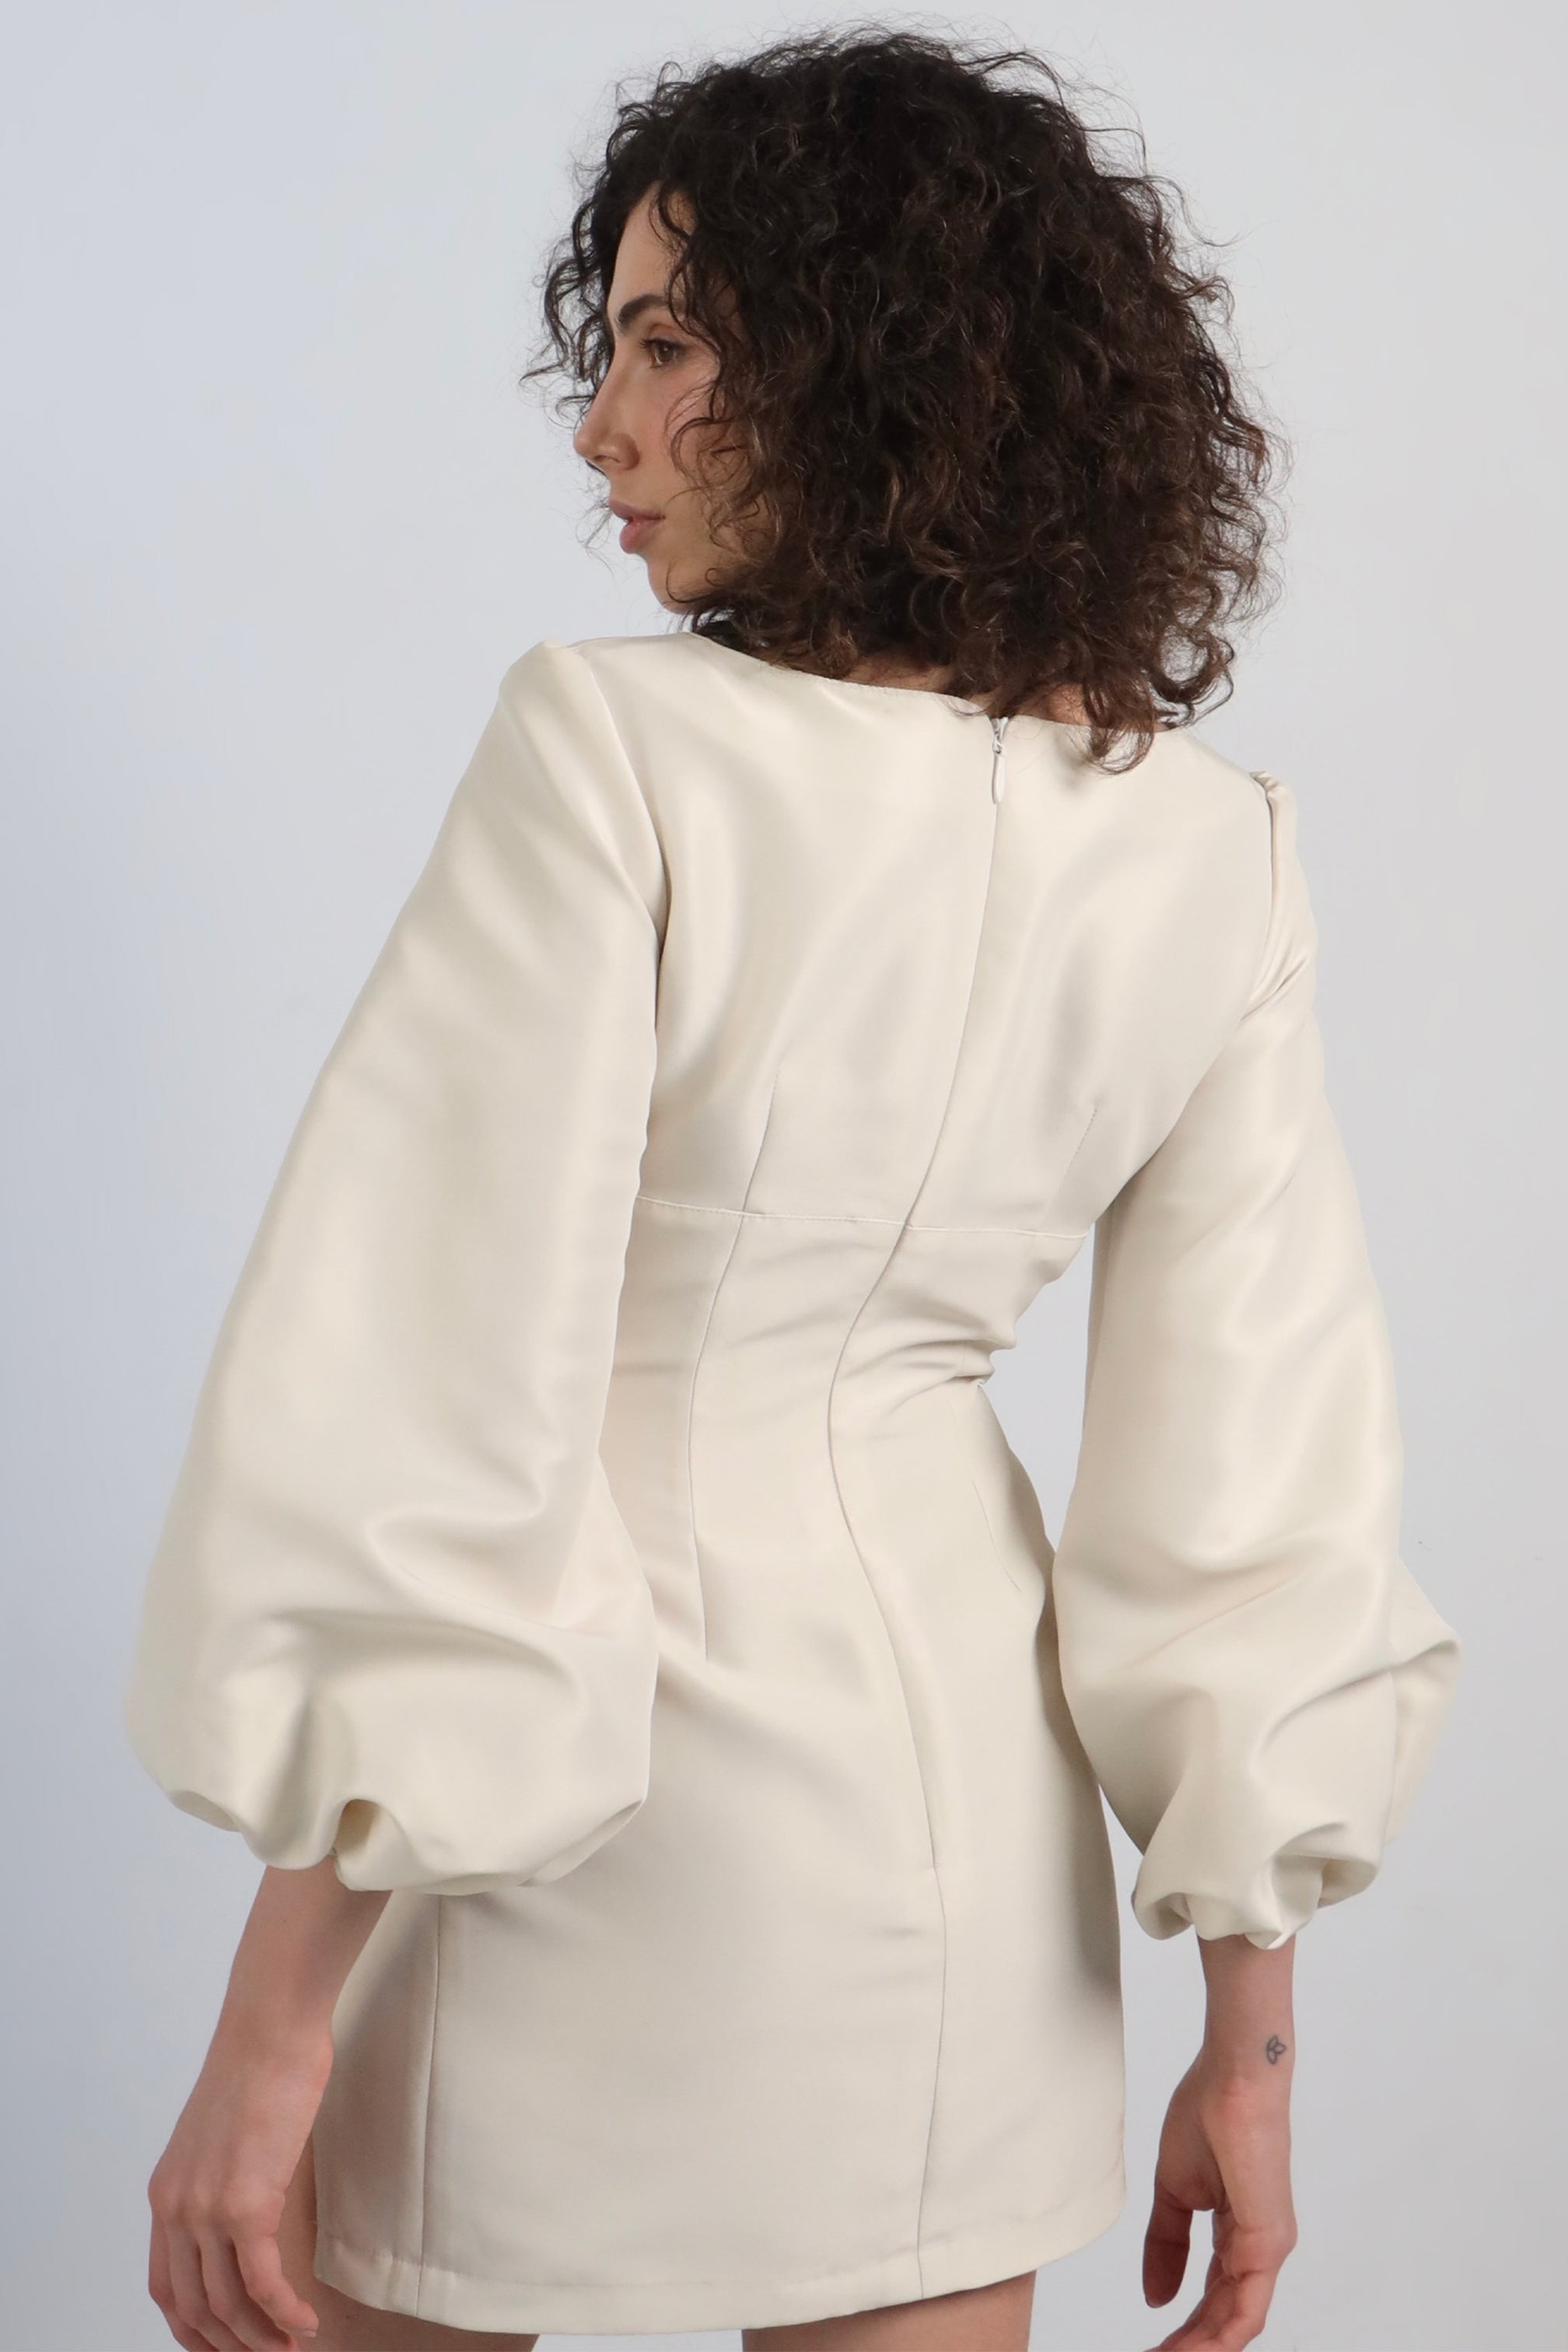 WHITE EXAGGERATED BISHOP SLEEVES DRESS